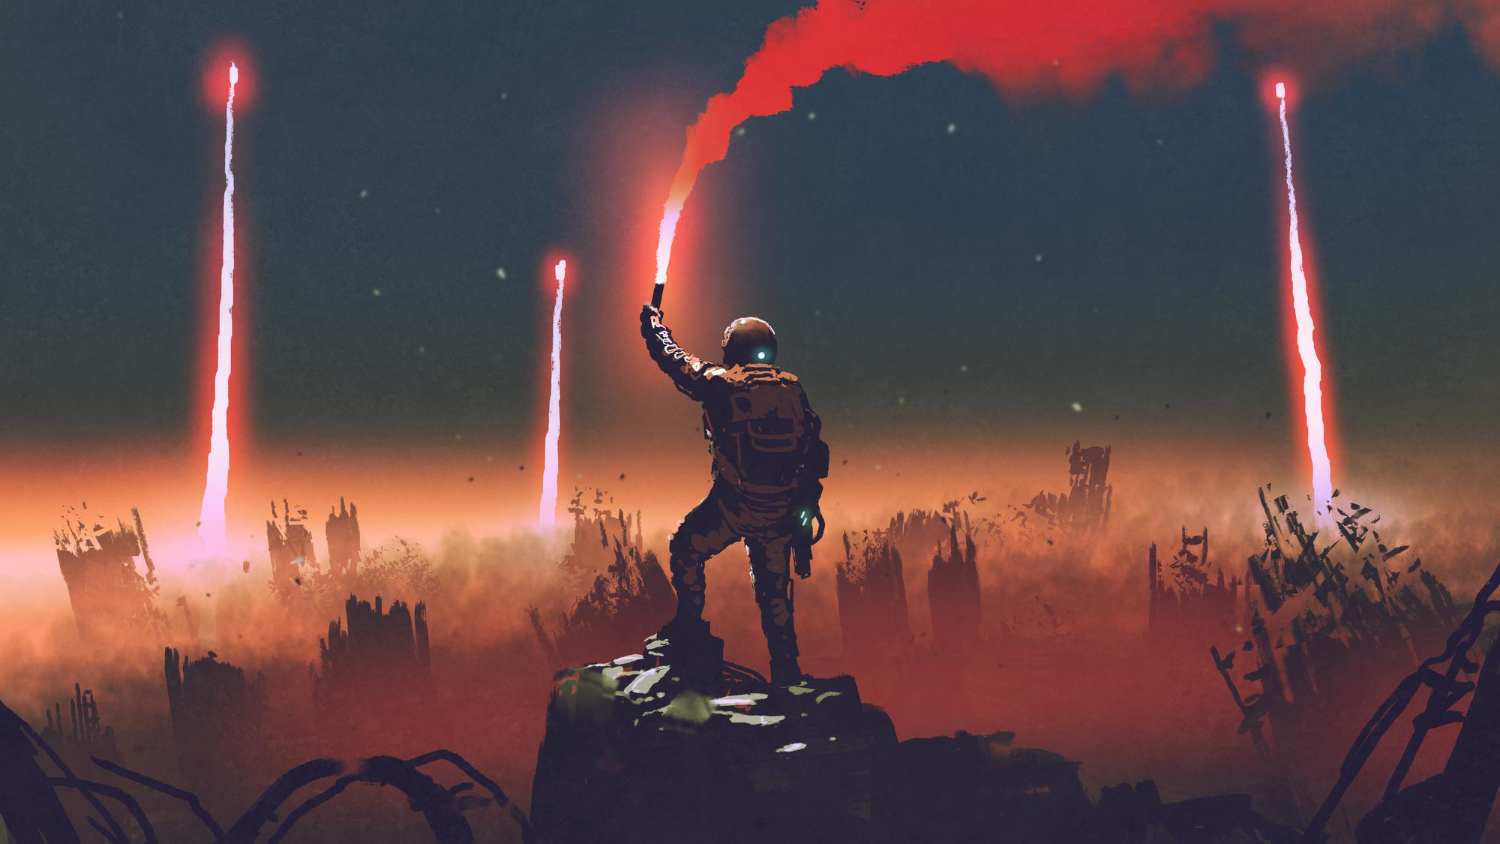 man holds red smoke flare up air standing against apocalypse world digital art style illustration-painting